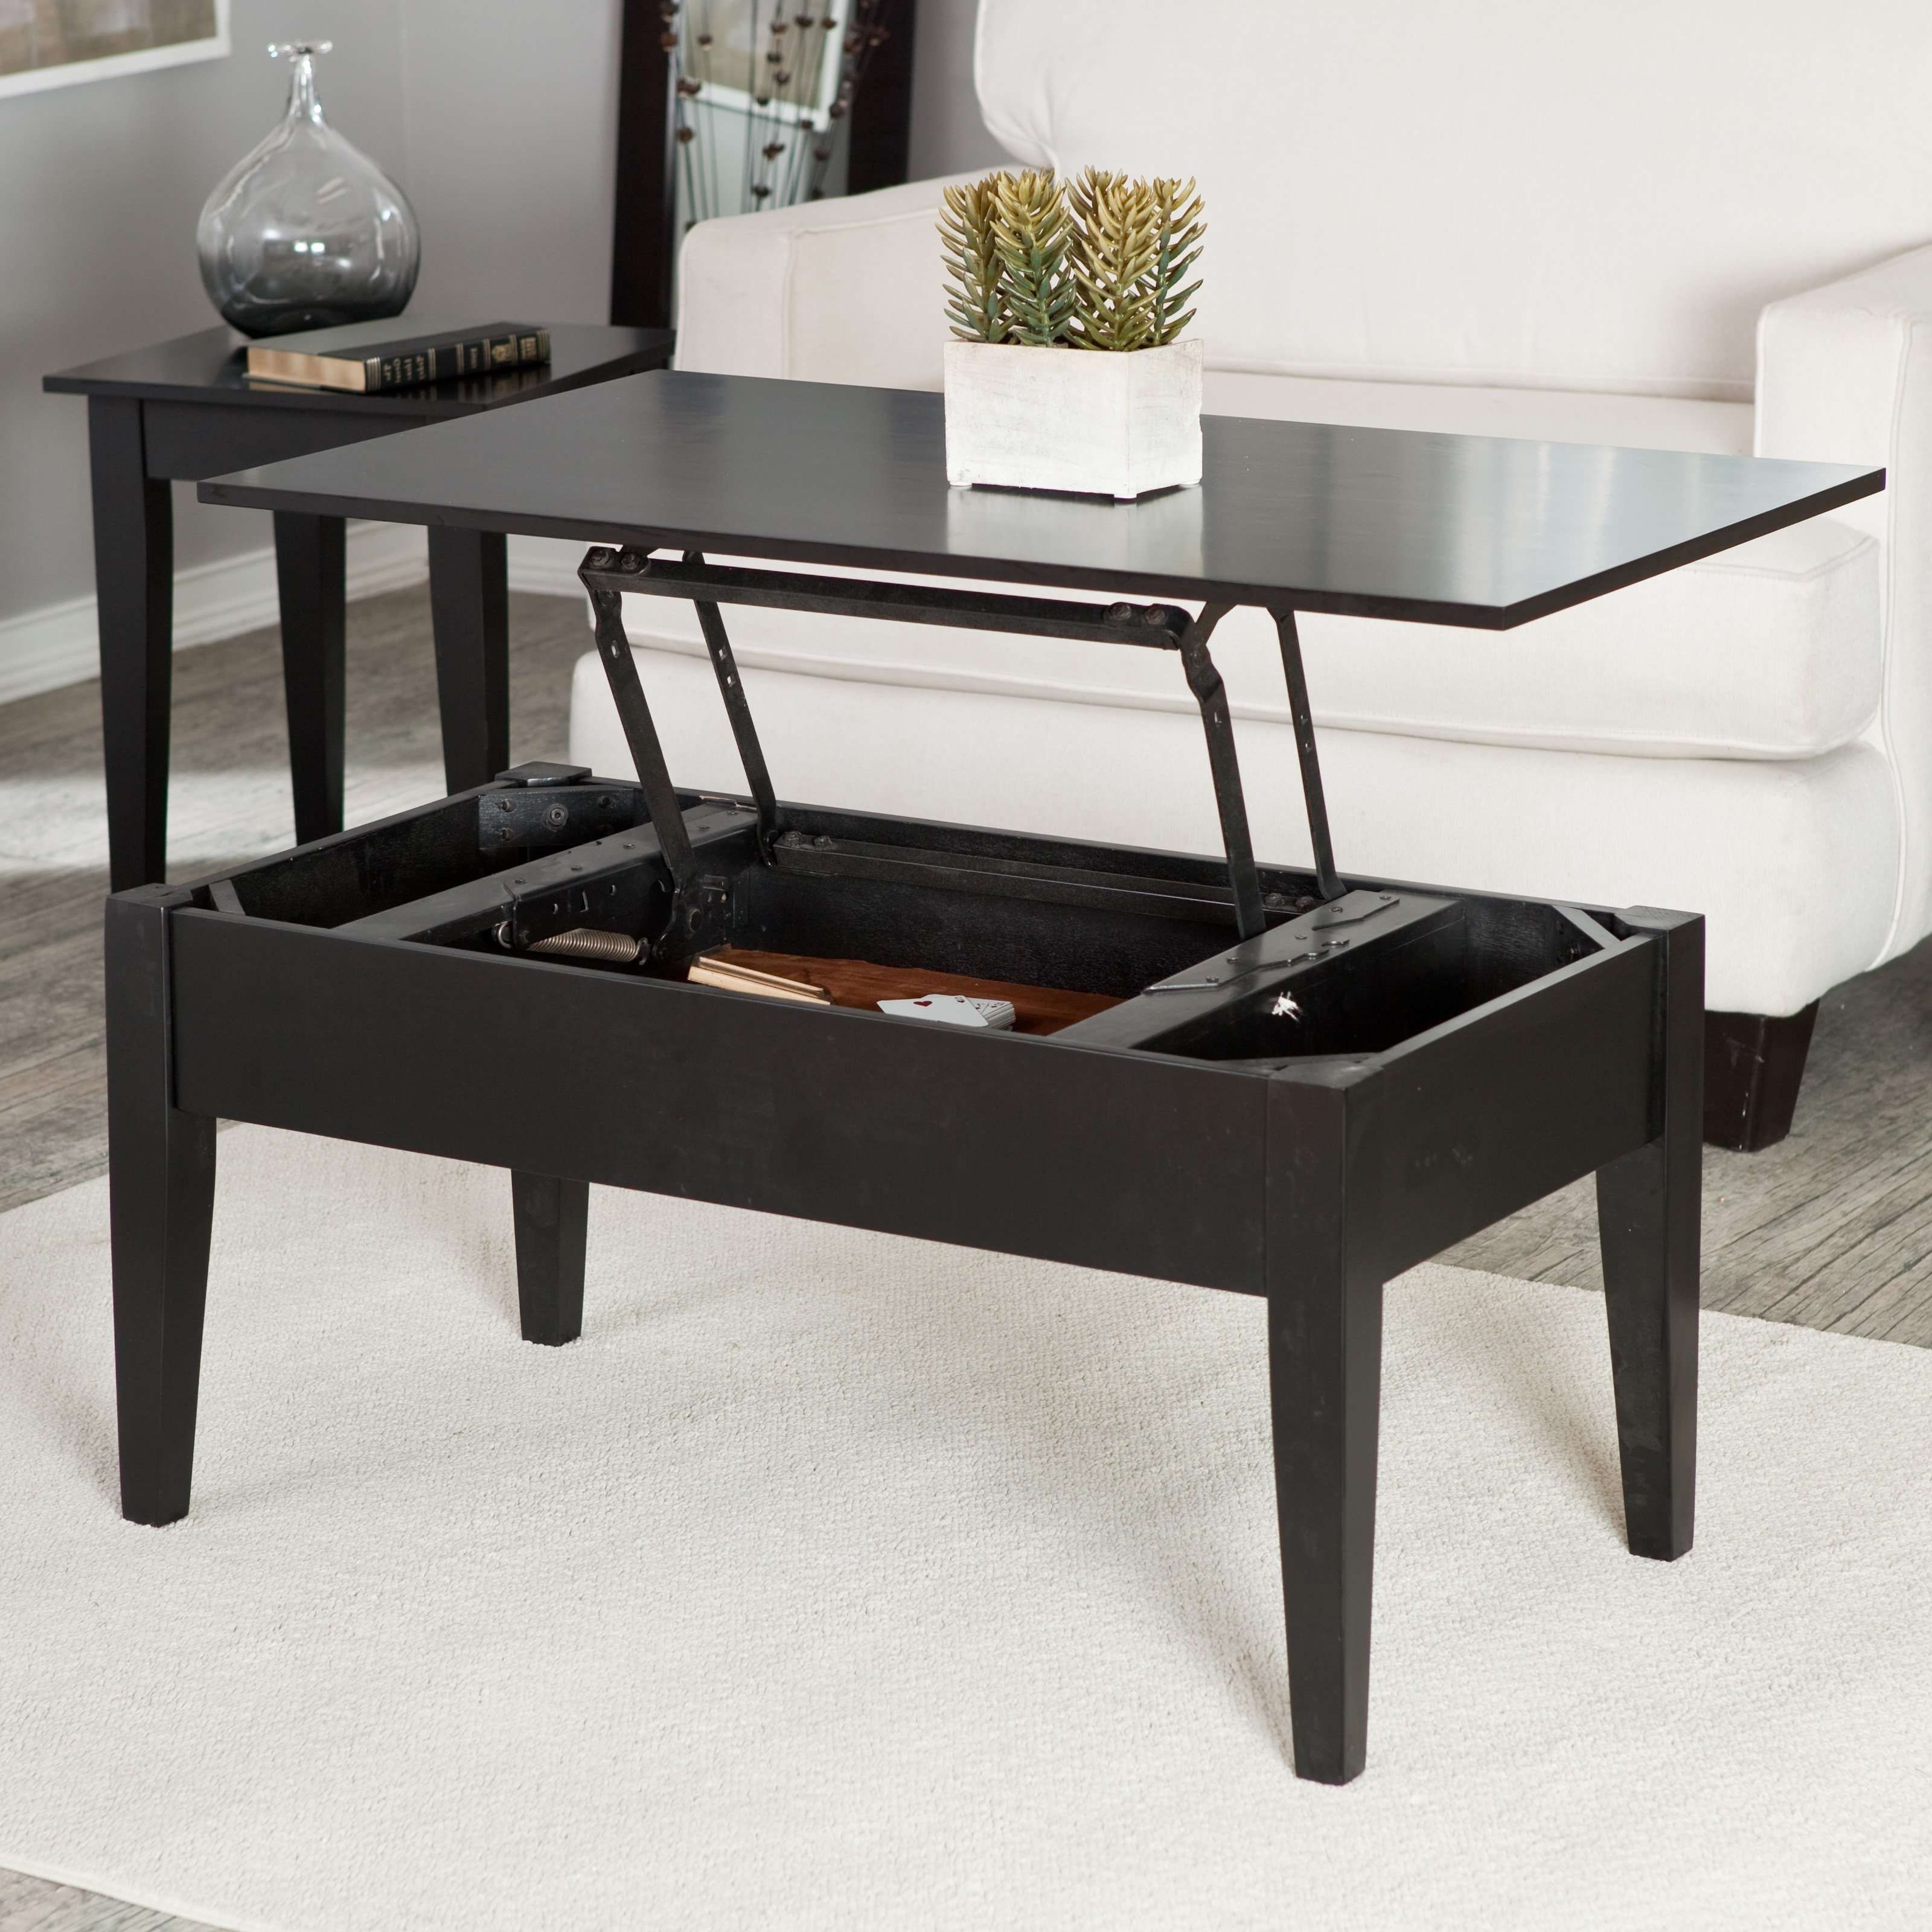 Turner Lift Top Coffee Table – Espresso (View 6 of 20)